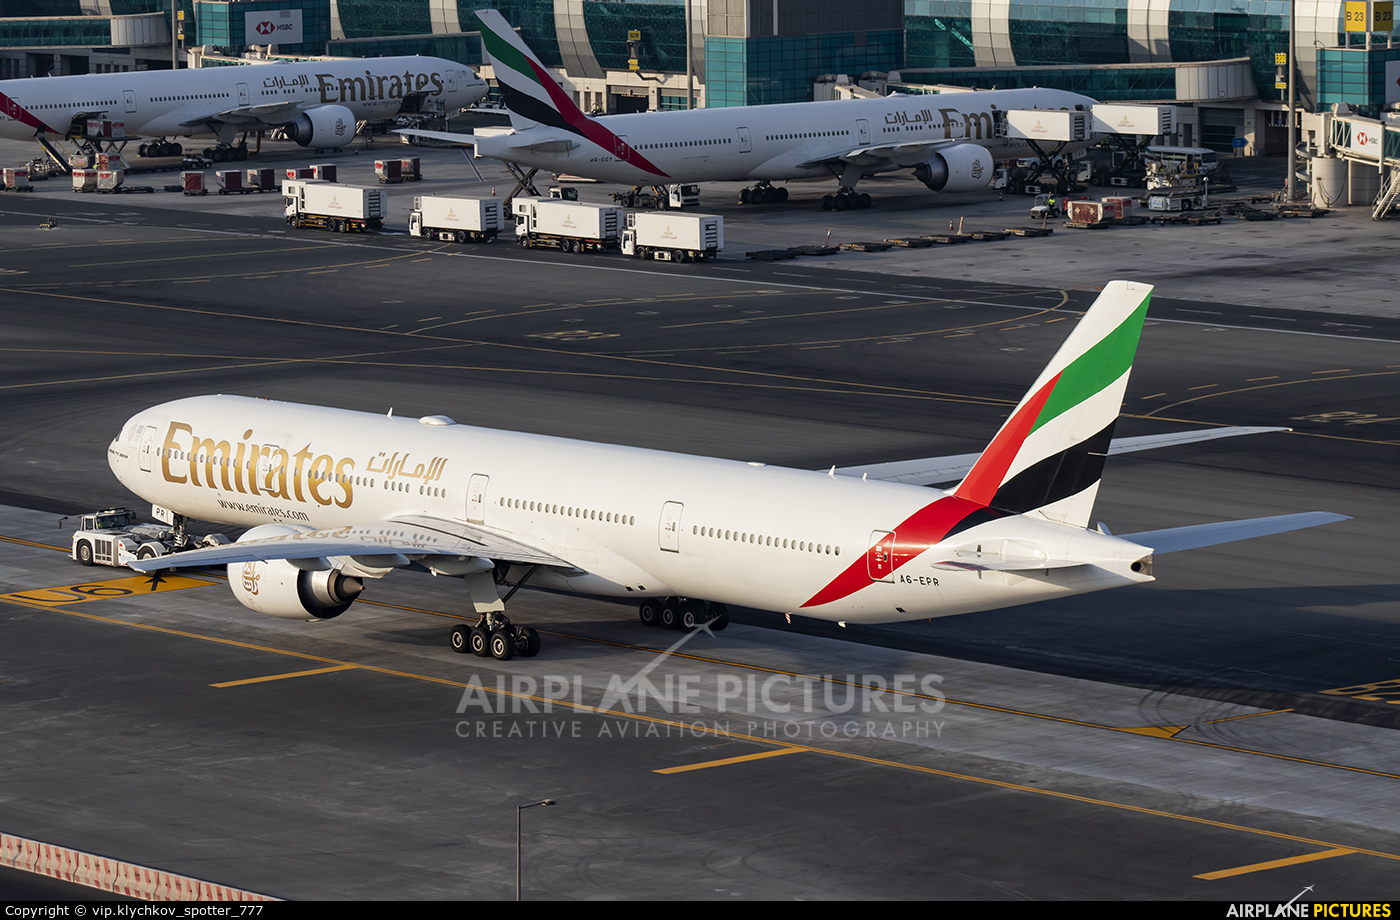 Emirates Airlines A6-EPR aircraft at Dubai Intl